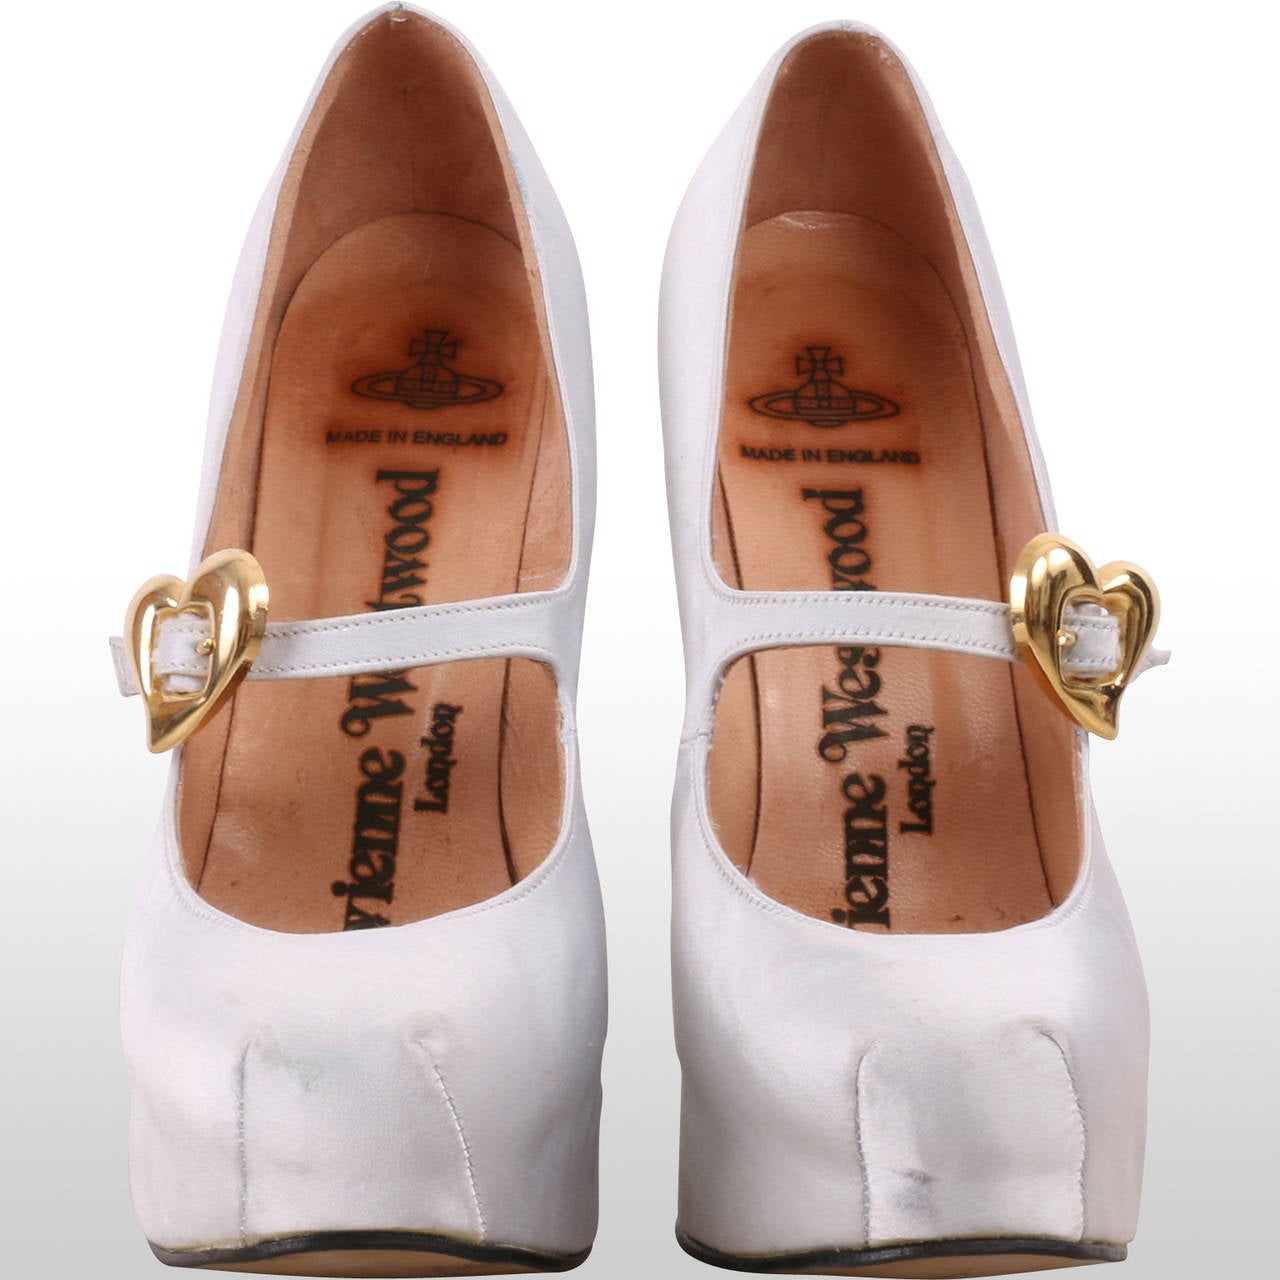 These beautiful one of a kind white satin high heals where custom made for Tiger Savage - by Vivienne Westwood - for her wedding day. The golden heart shaped buckle adds that very special detail to these otherwise beautifully simple shoes.